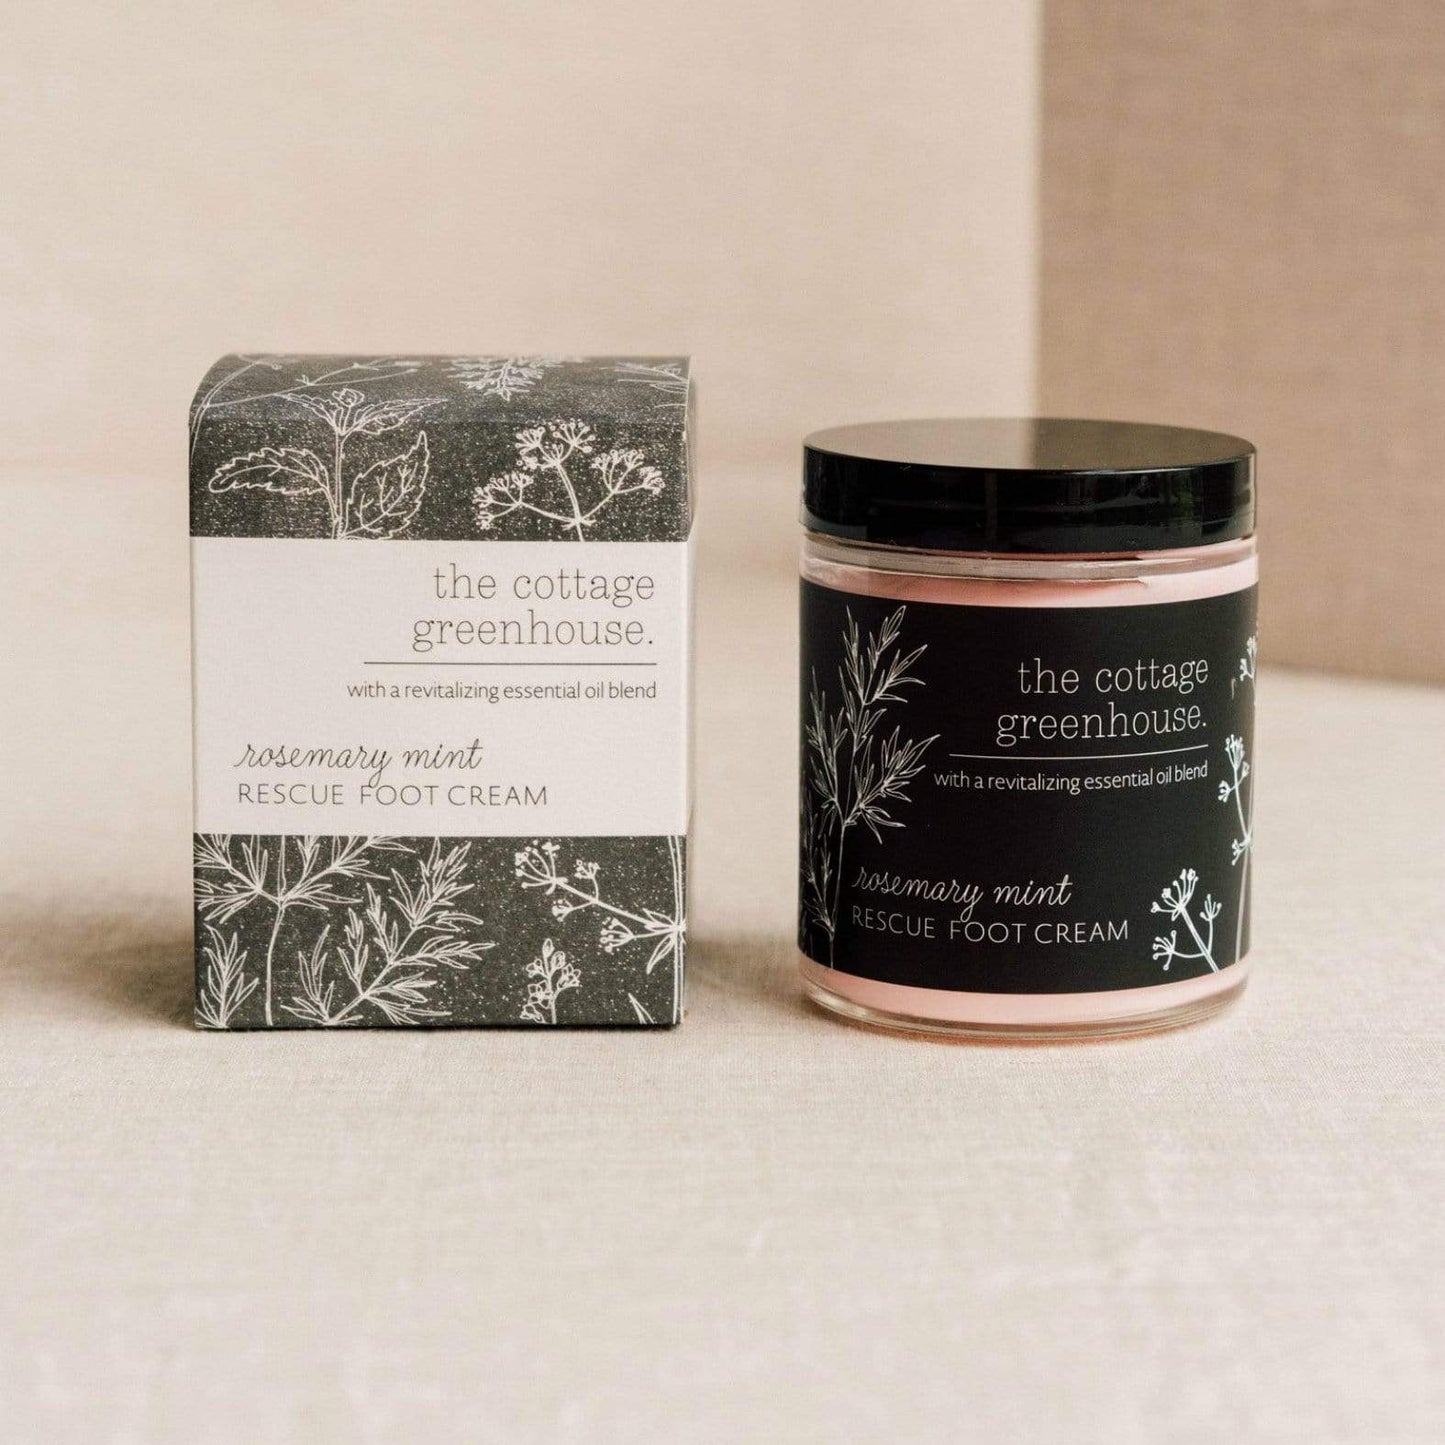 Luxe & Bloom - The Cottage Greenhouse Rosemary Mint Rescue Foot Cream